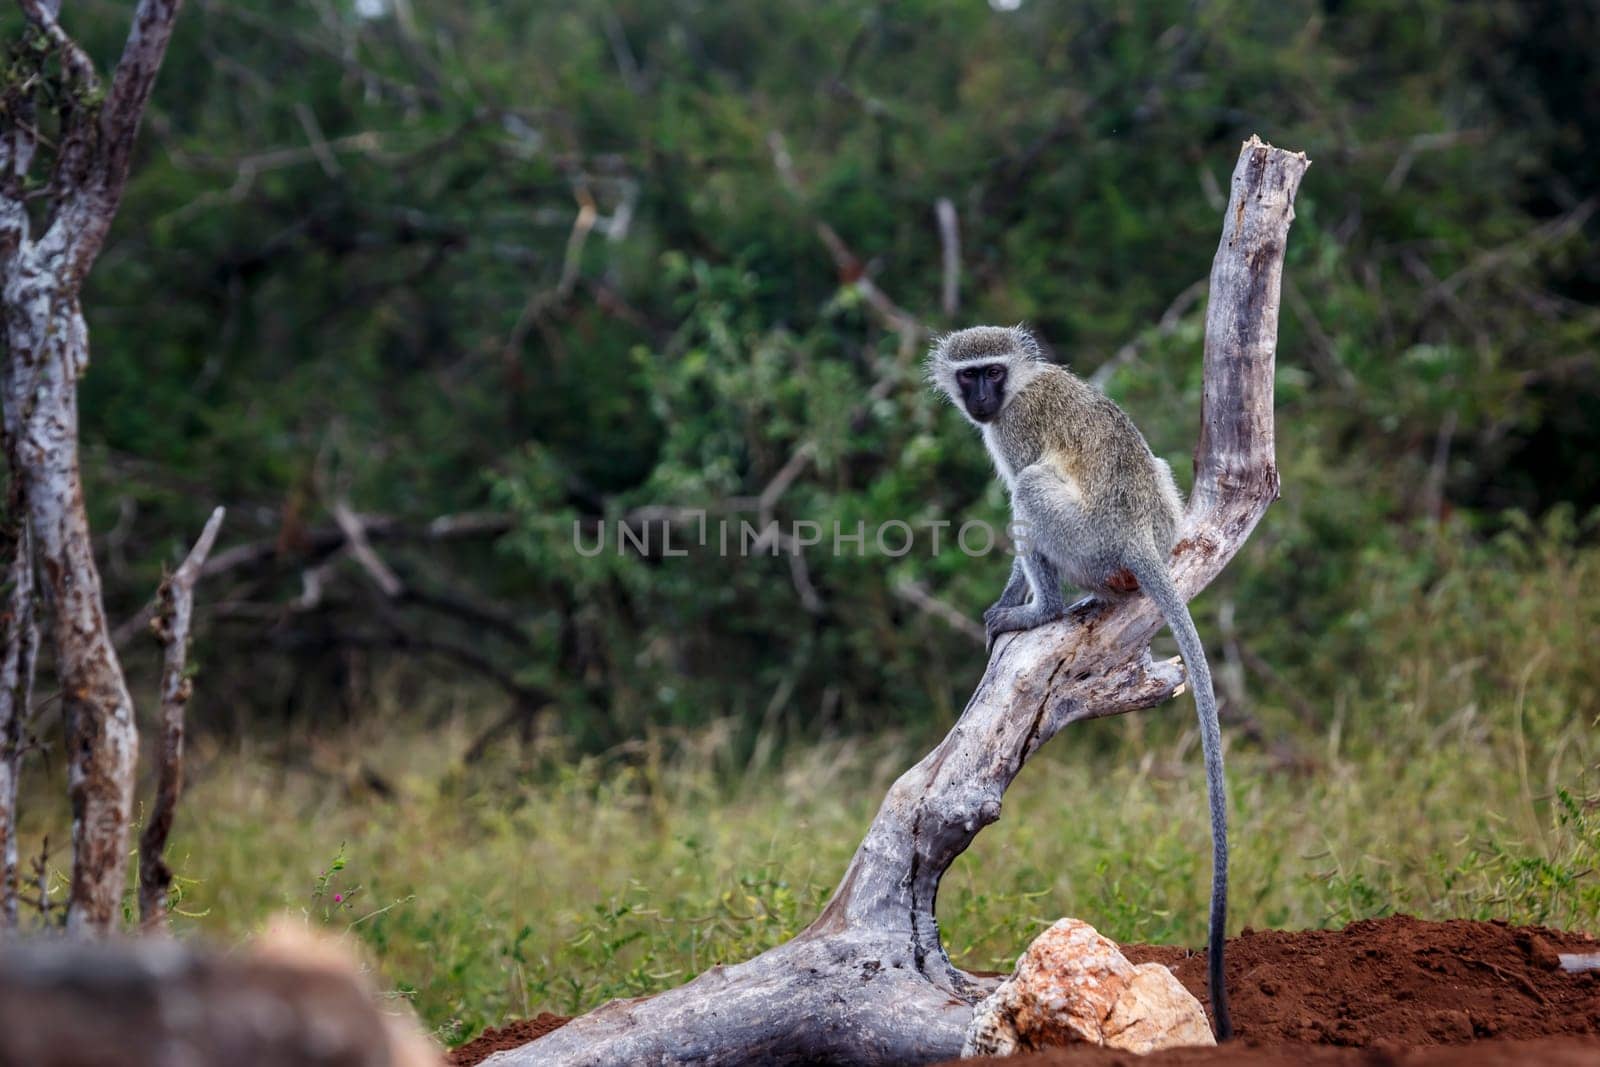 Vervet monkey standing on a log in Kruger National park, South Africa ; Specie Chlorocebus pygerythrus family of Cercopithecidae